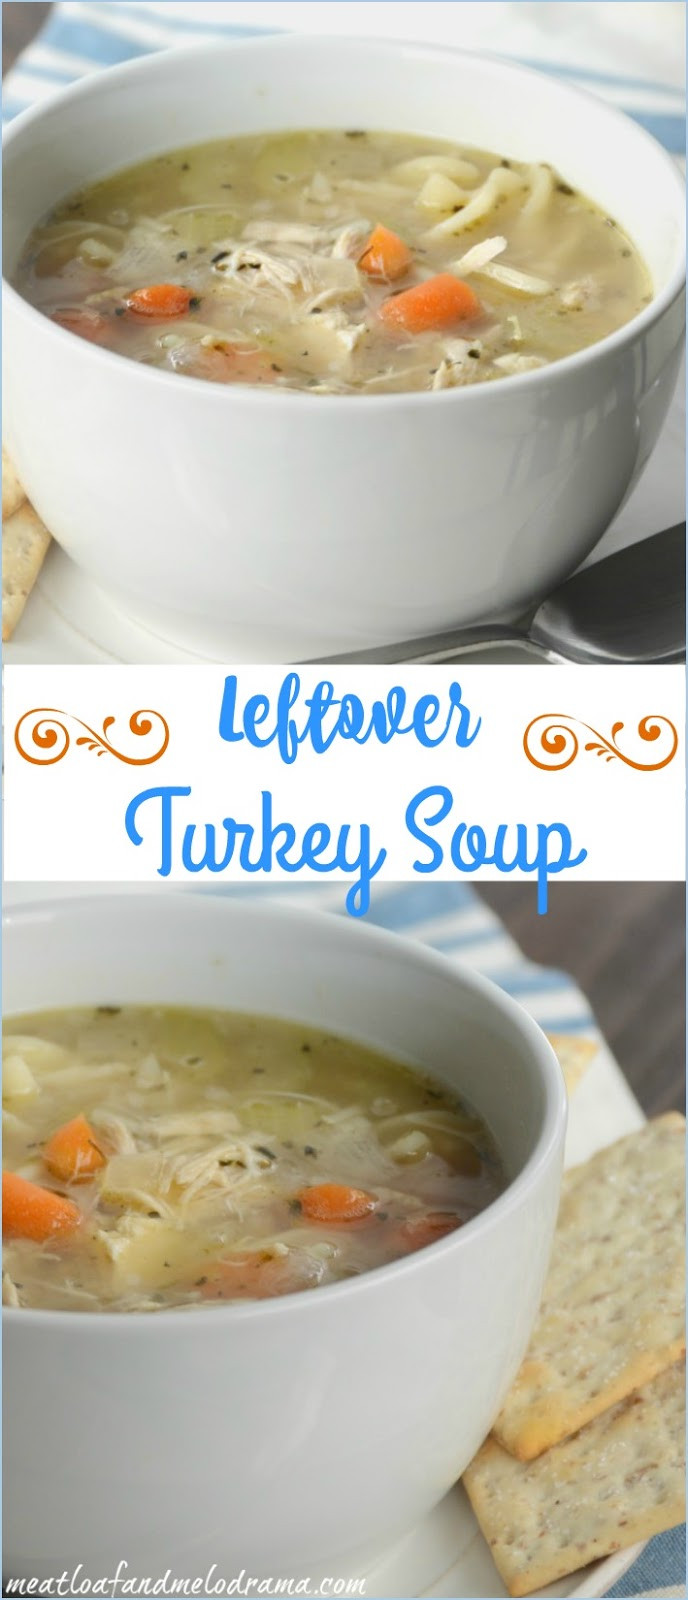 Turkey Soup From Thanksgiving Leftovers
 Easy Turkey Soup Meatloaf and Melodrama